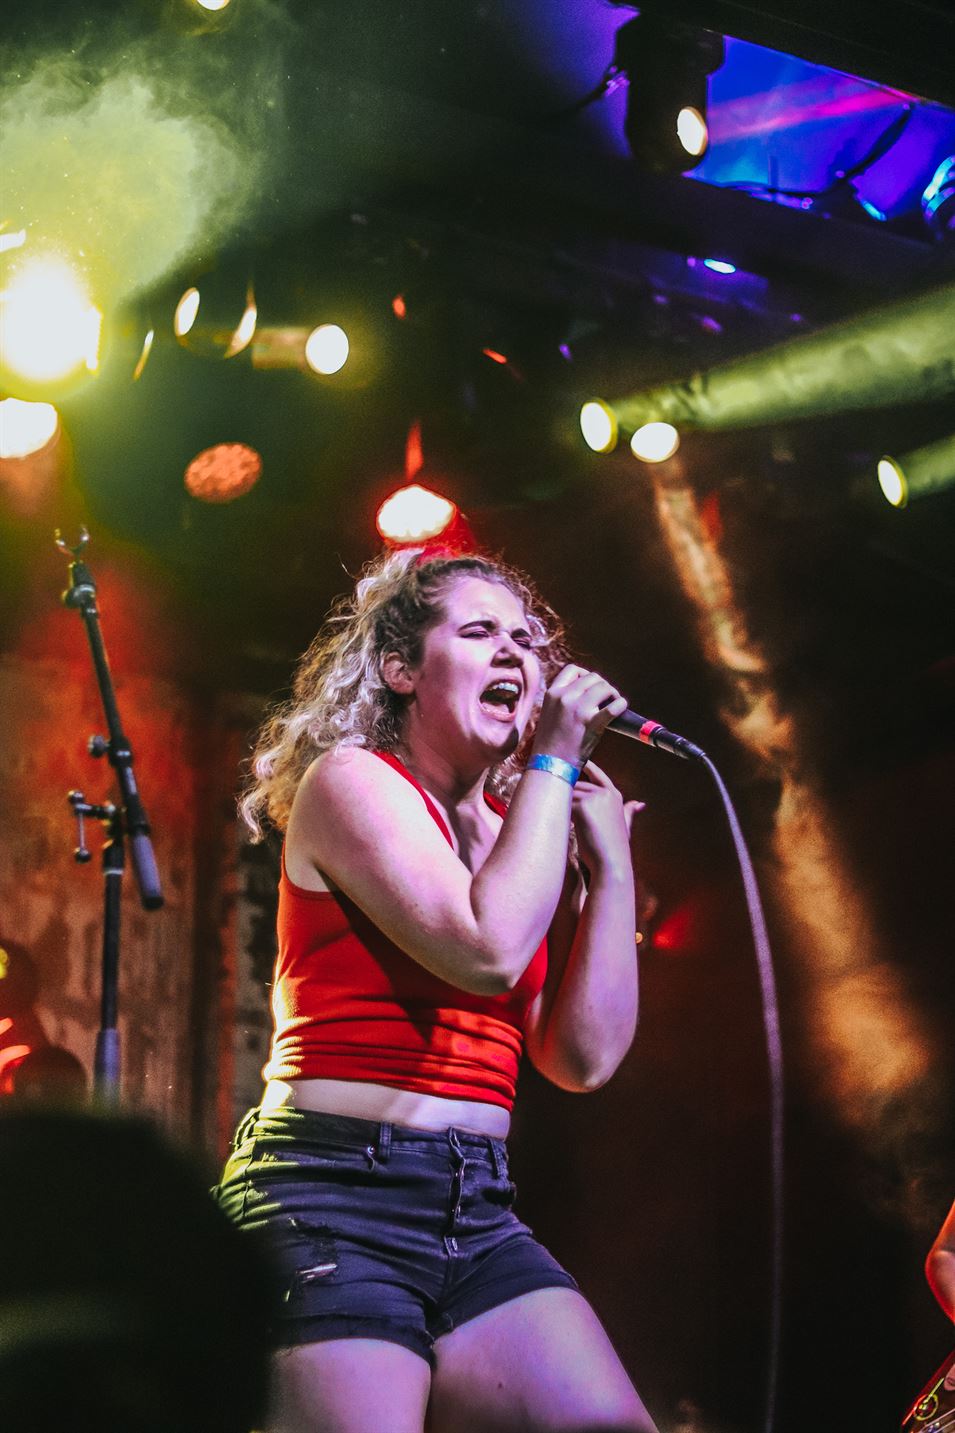 Gabrielle Guida singing her heart out at Asbury Lanes in July 2019. Photo Courtesy of Chloe Brenna